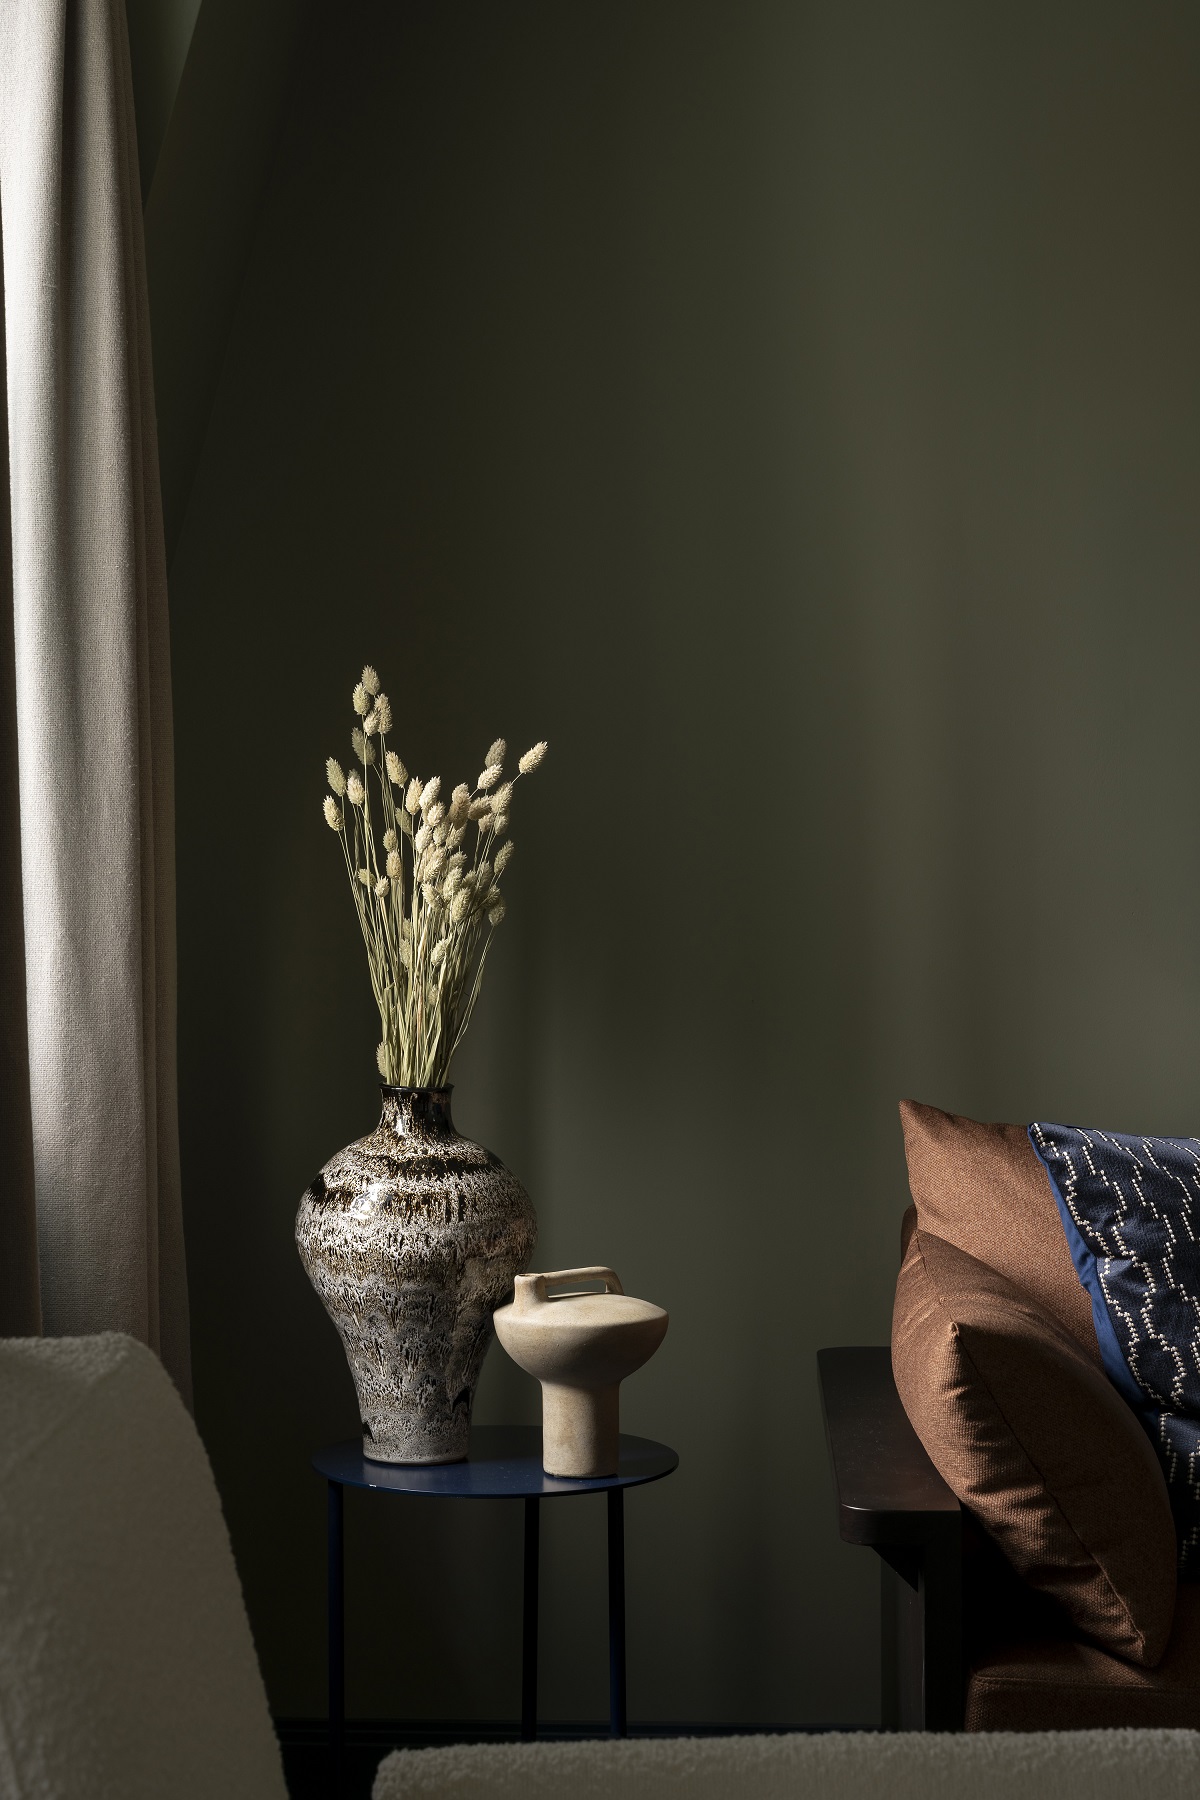 ceramic vases and leather couch against dark grey wall